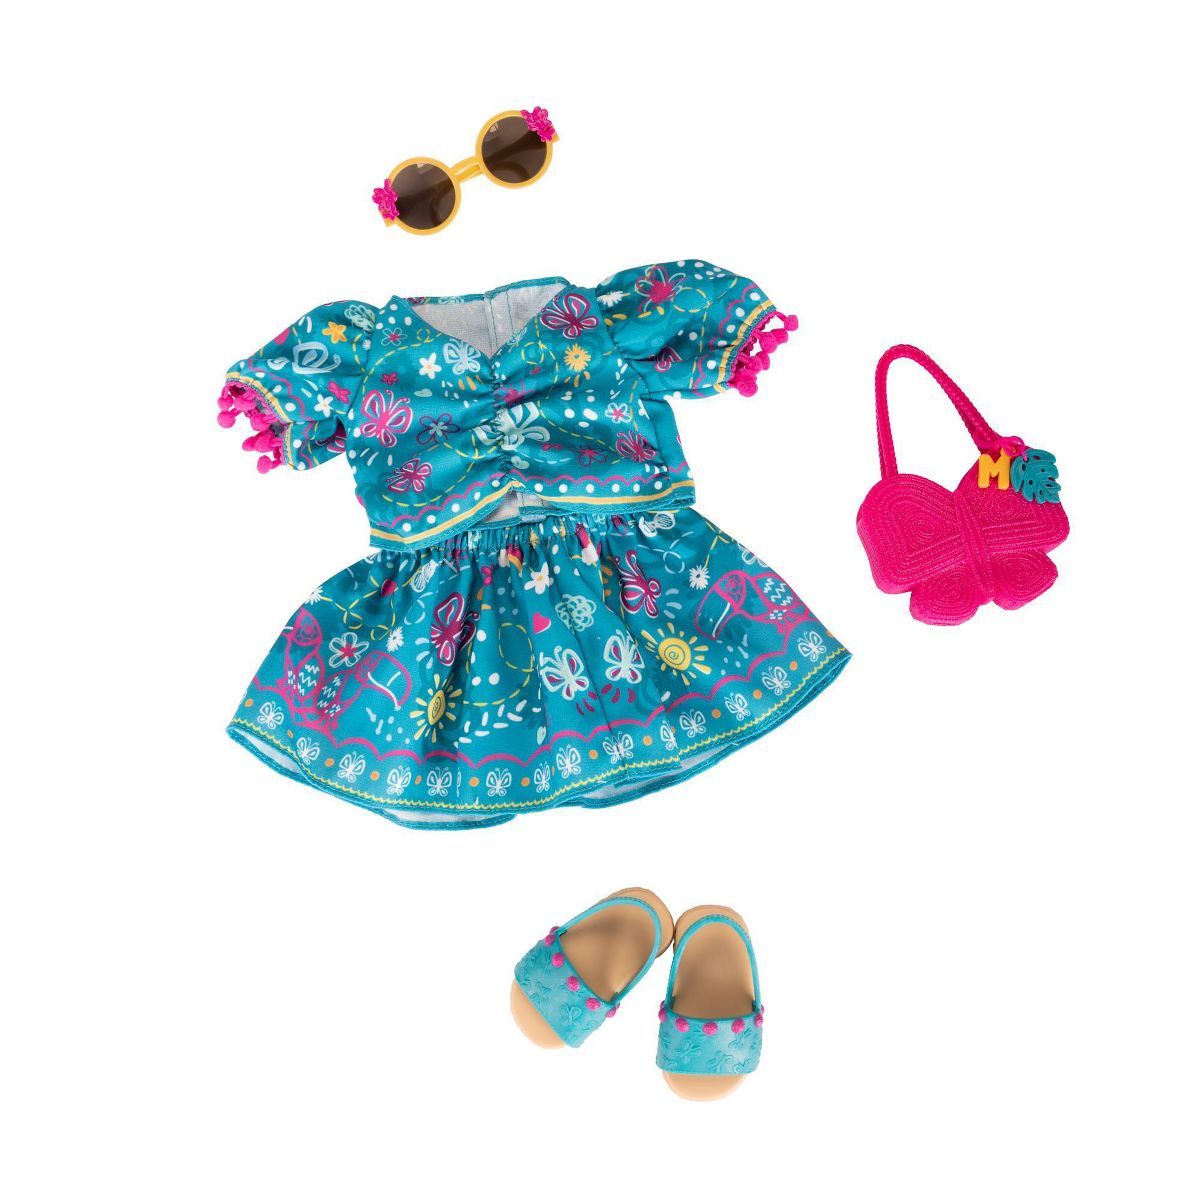 Disney ILY 4ever 18" Fashion Pack - Mirabel Bday Party Dress (Target Exclusive) | Target